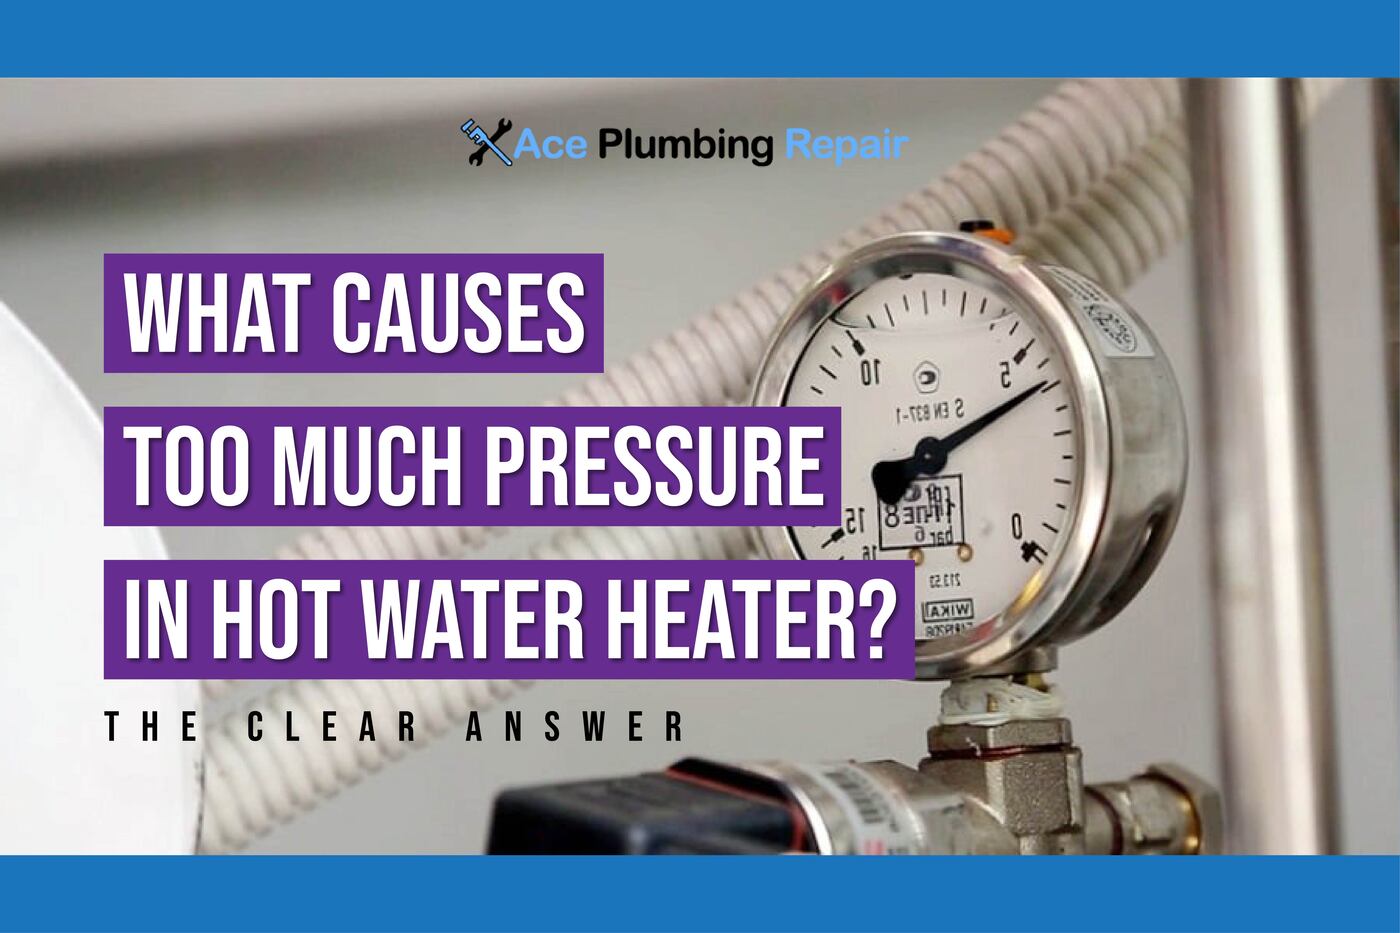 What causes too much pressure in hot water heater